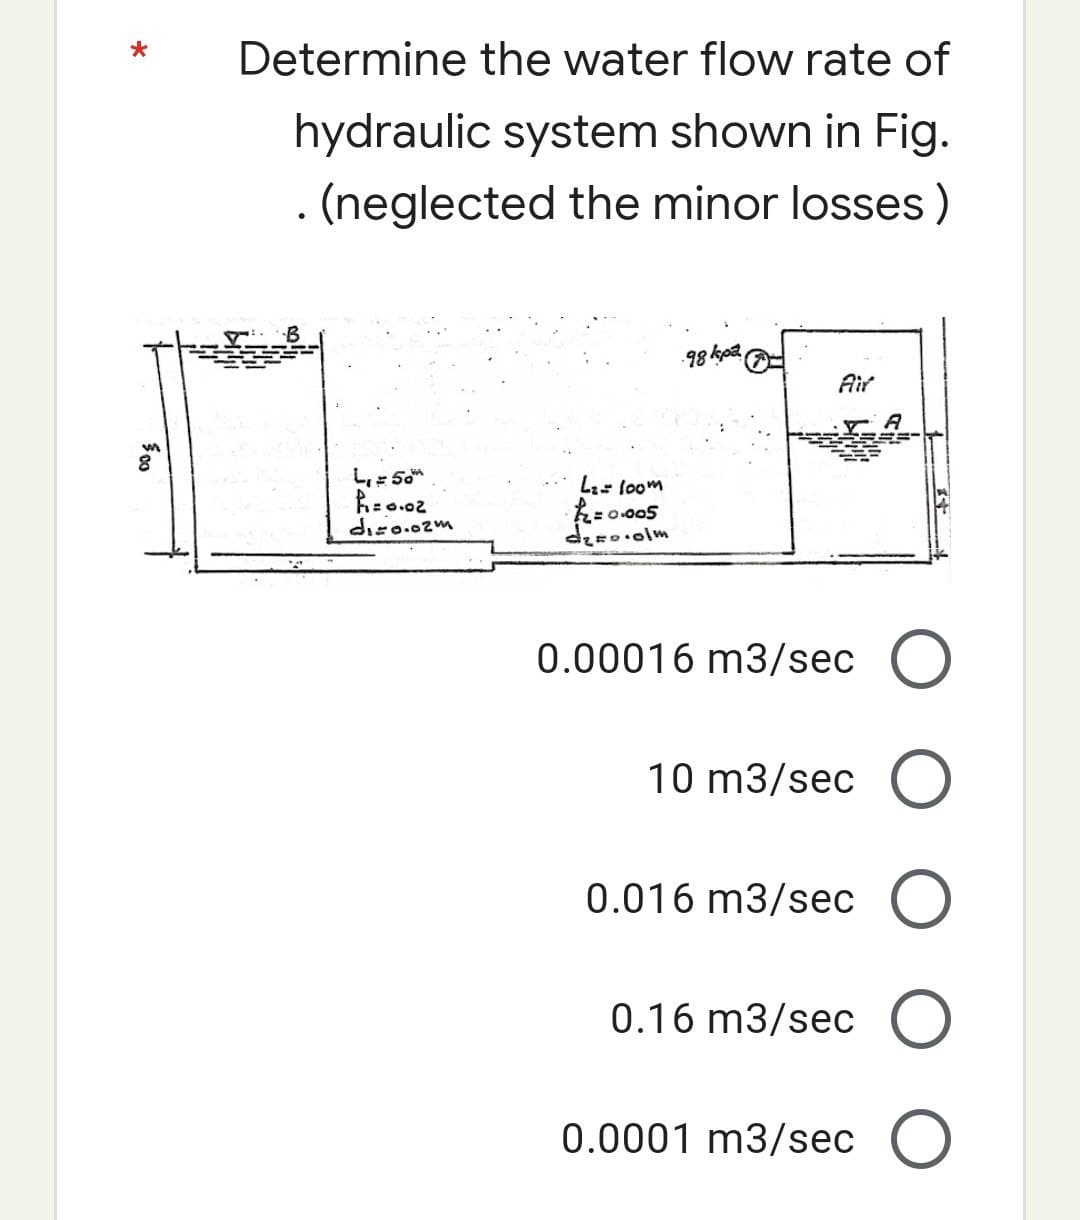 $00
8
Determine the water flow rate of
hydraulic system shown in Fig.
. (neglected the minor losses)
L₁ = 50
A=0.02
diz0.02m
L₂=100m
·1₂2=0
= 0.005
d₂50.0lm
Air
0.00016 m3/sec O
10 m3/sec O
0.016 m3/sec O
0.16 m3/sec O
0.0001 m3/sec O